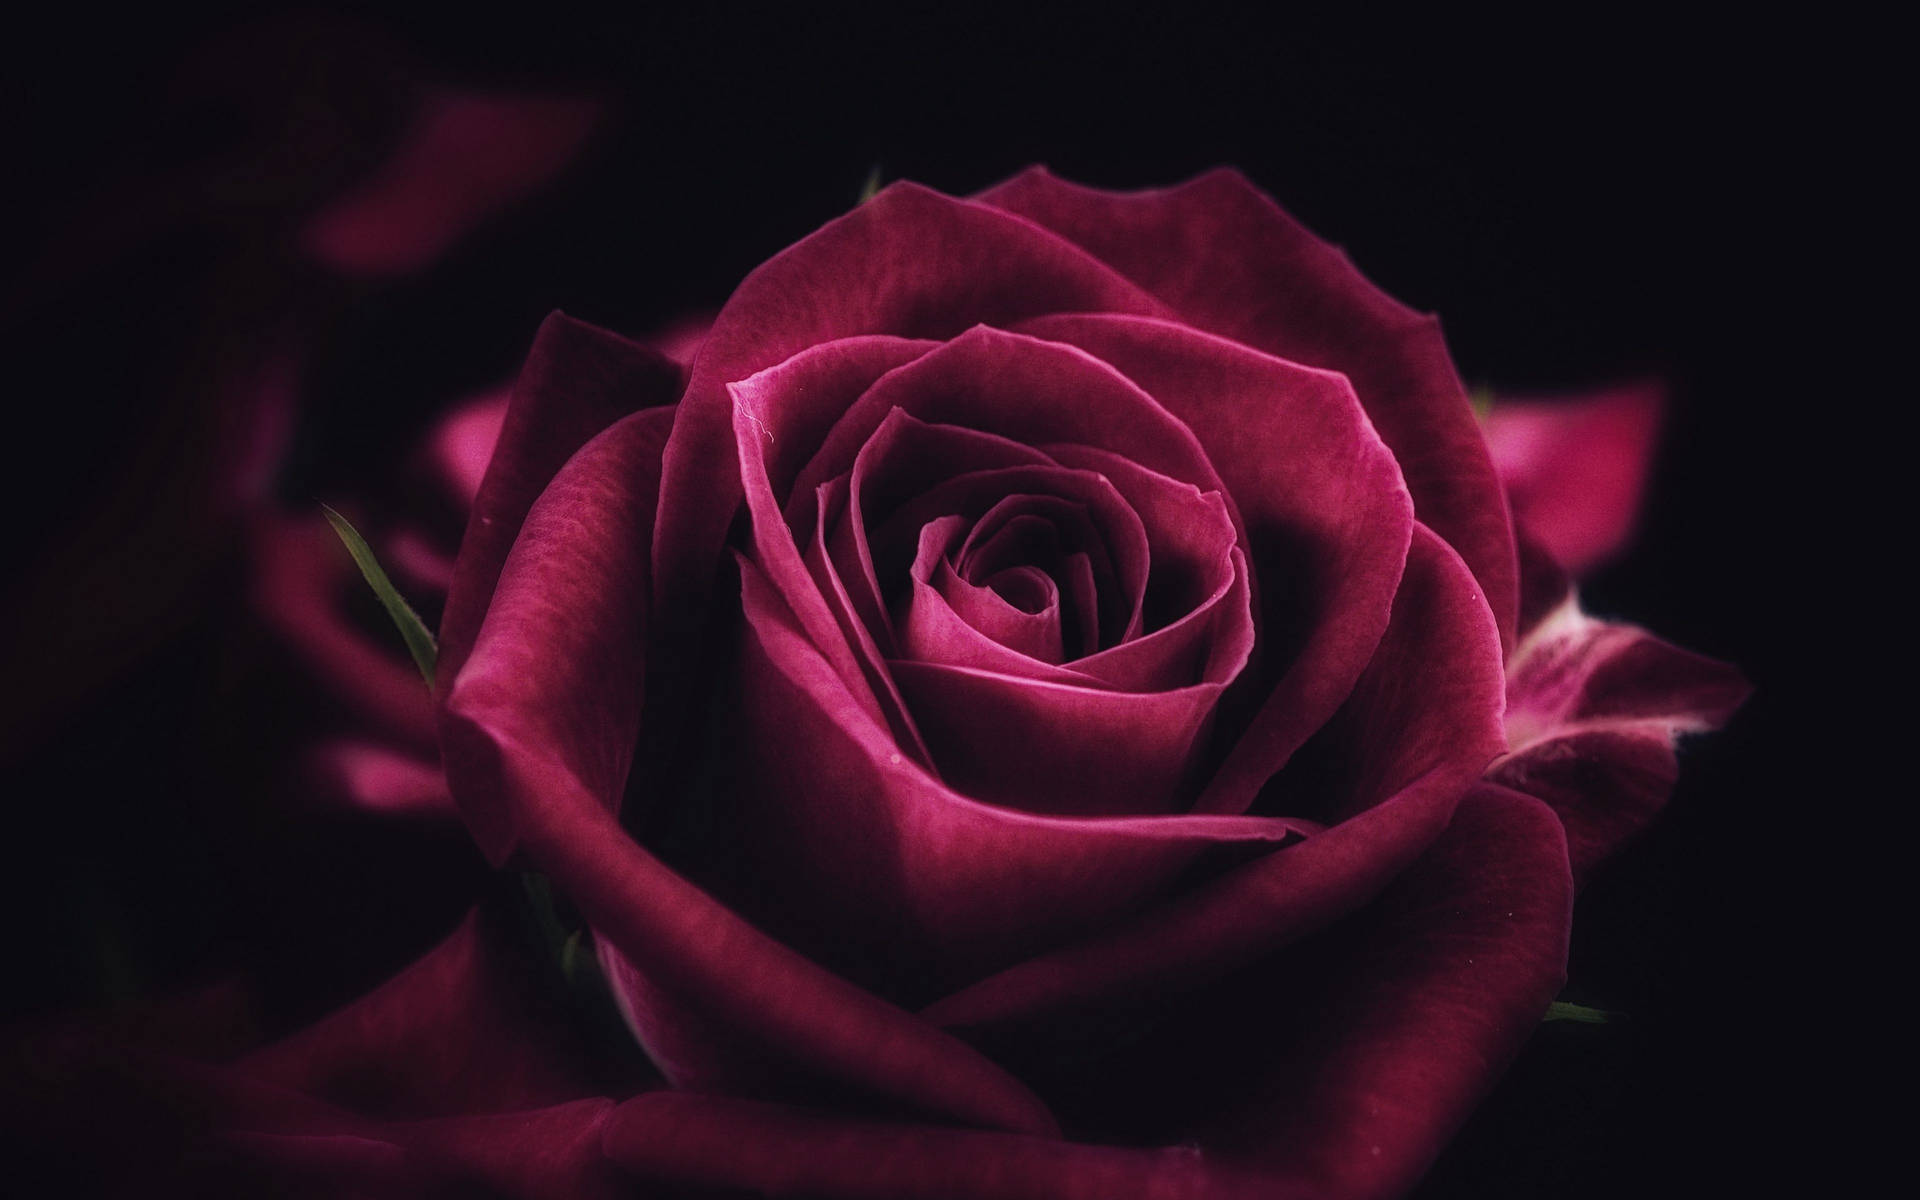 Free Rose Wallpaper Downloads, [500+] Rose Wallpapers for FREE | Wallpapers .com